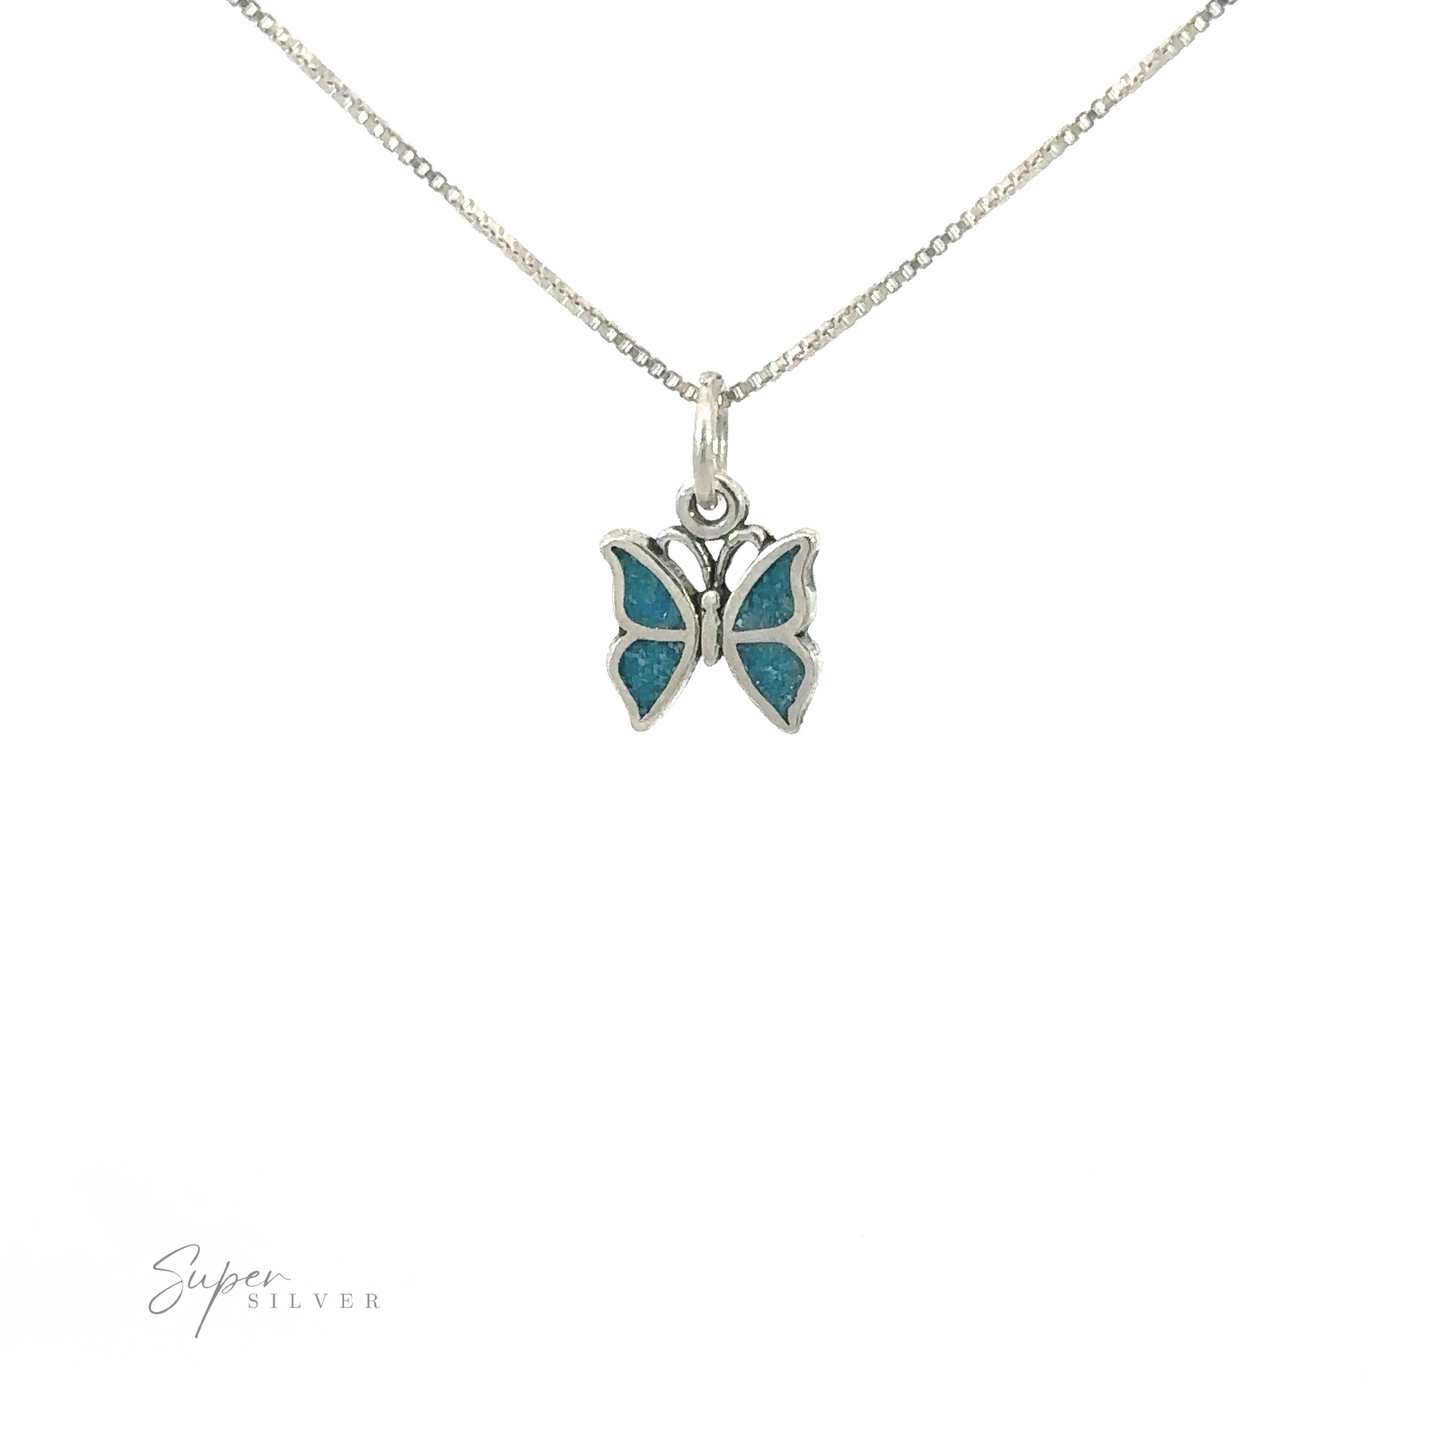 A Little Turquoise Butterfly Pendant with turquoise brilliance on a silver chain, showcasing understated beauty.